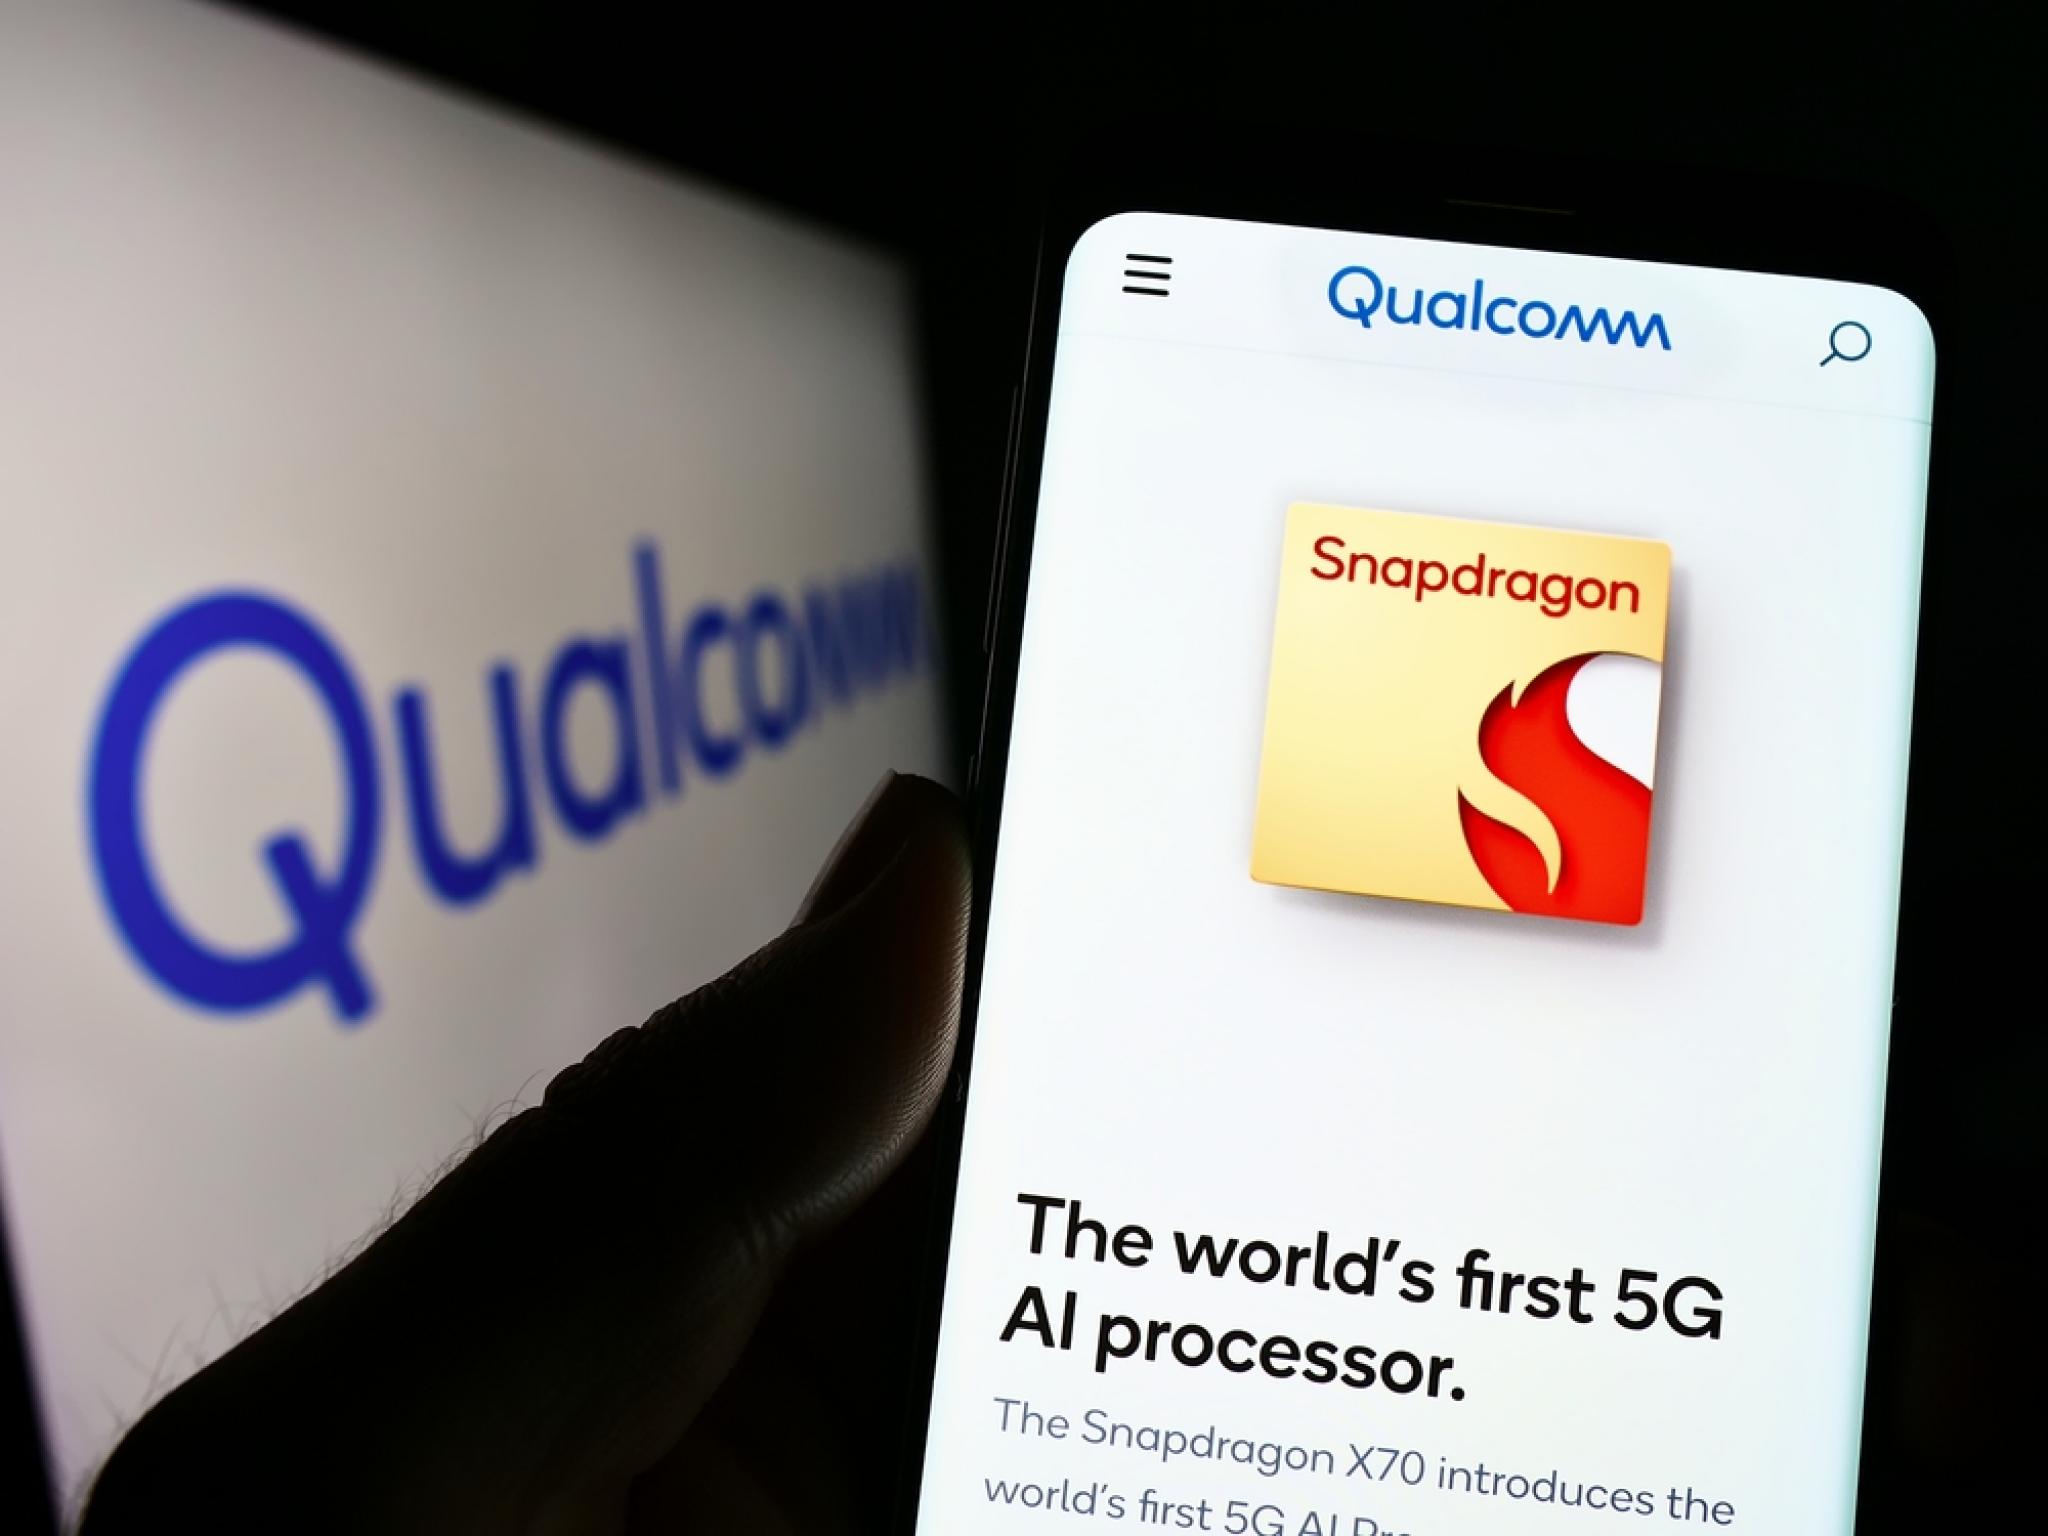  qualcomm-shares-rise-amid-nvidia-strength-whats-going-on 